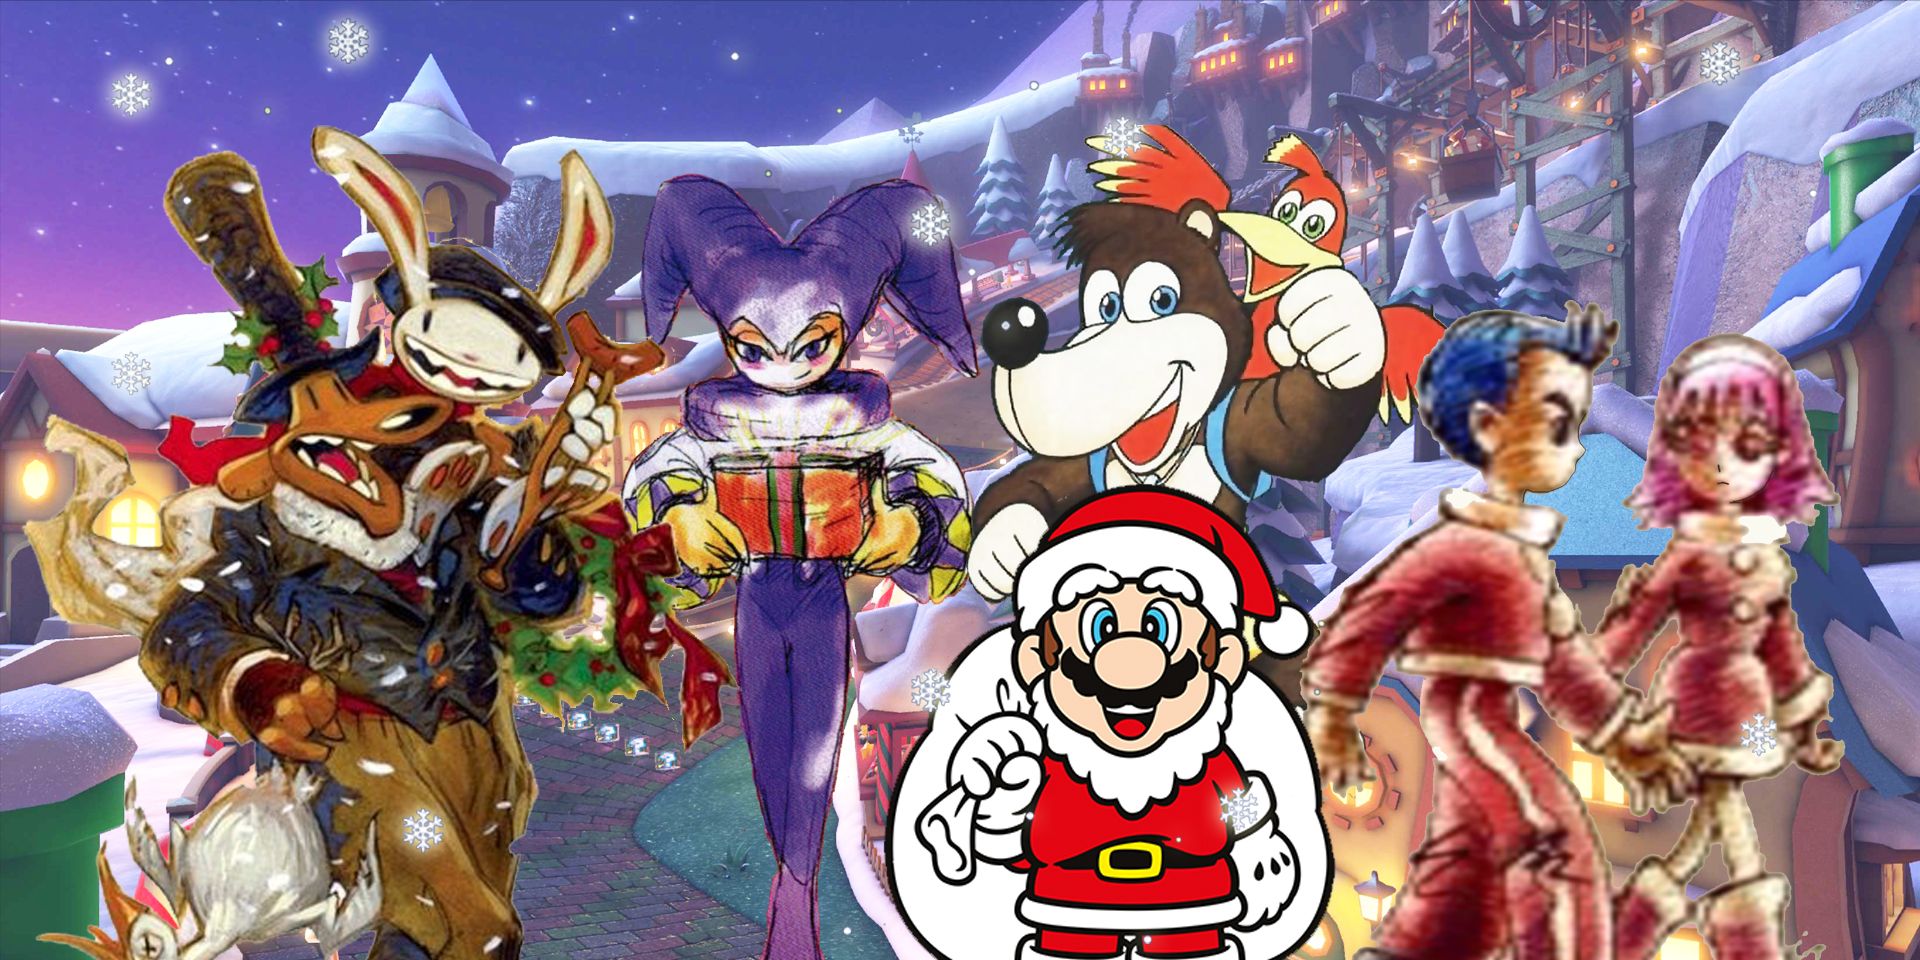 A cast of gaming icons celebrate the holidays.